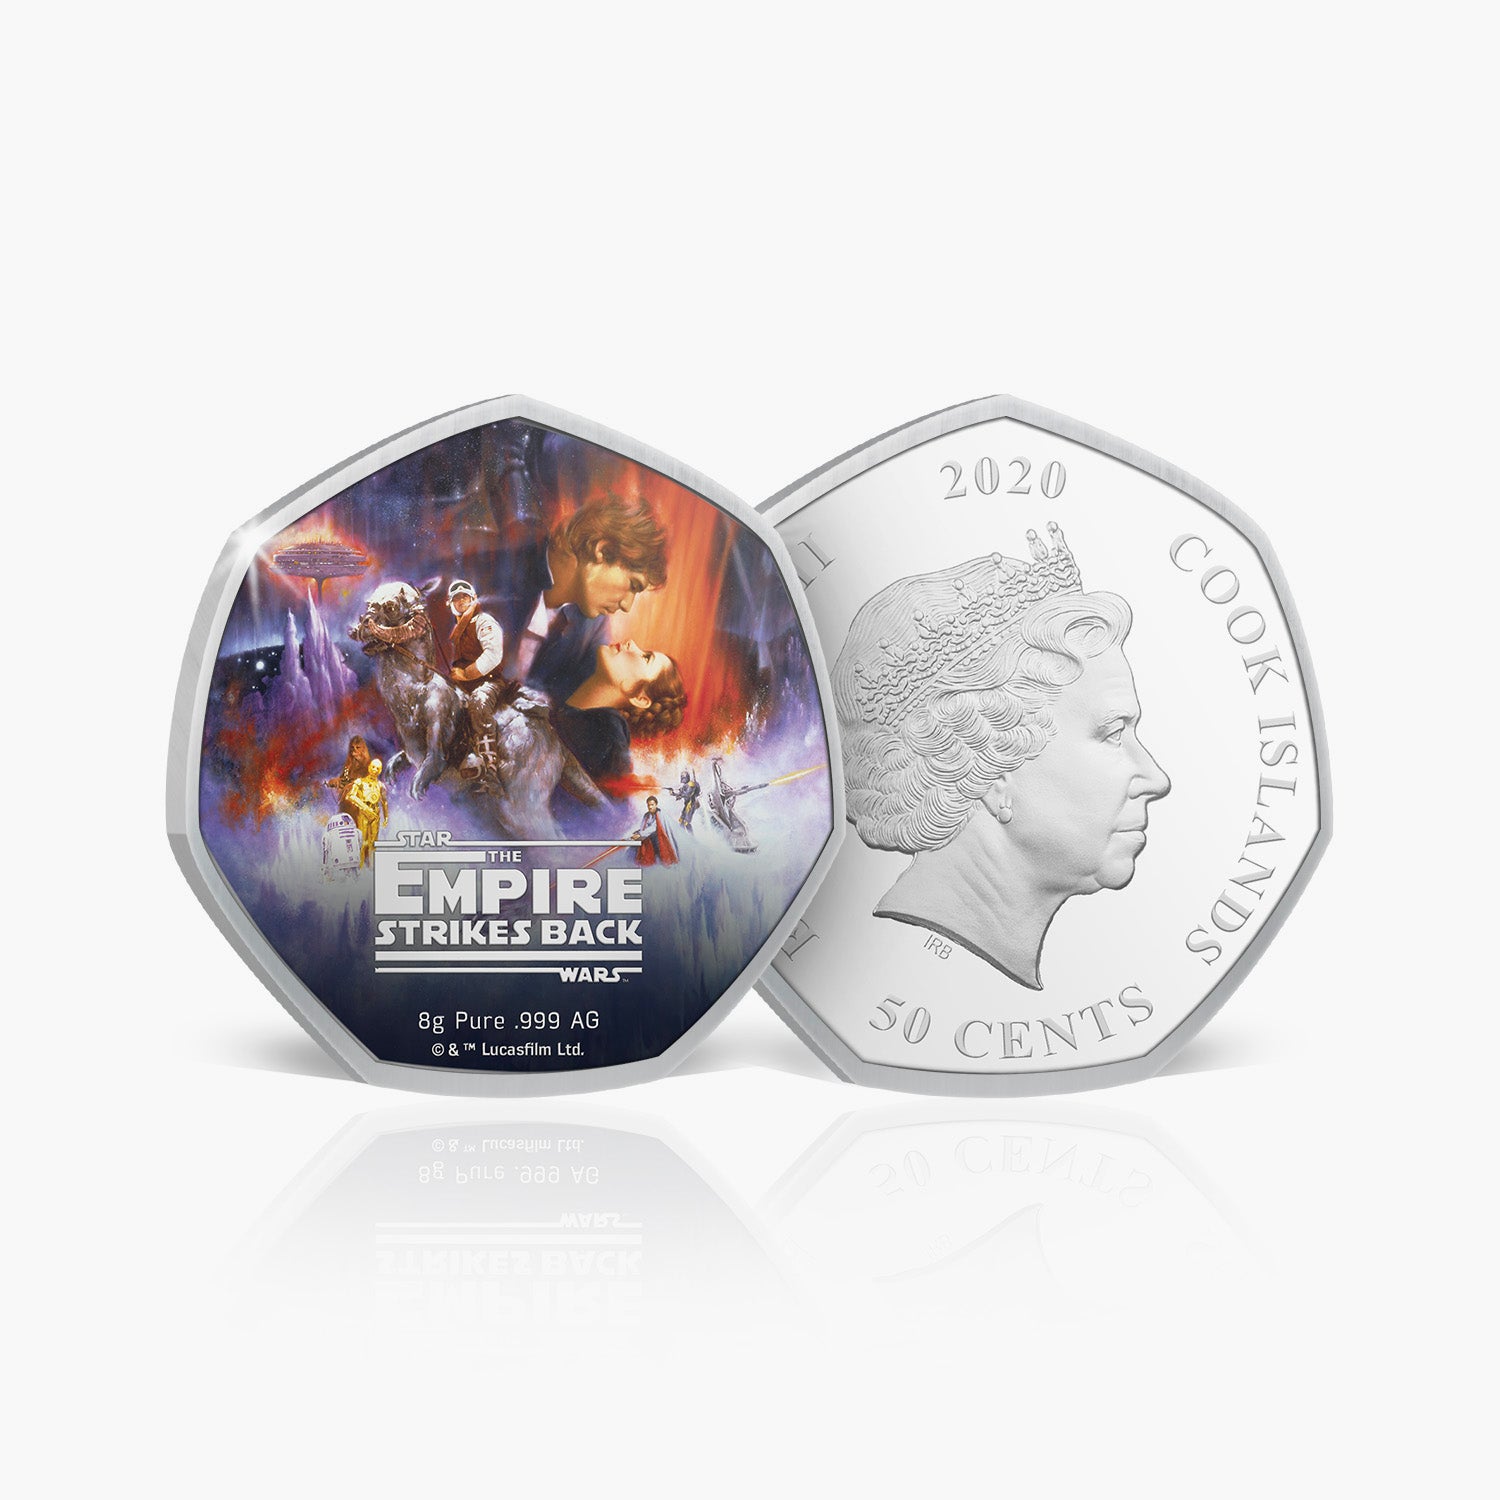 The Star Wars 40th Anniversary The Empire Strikes Back Solid Silver Coin